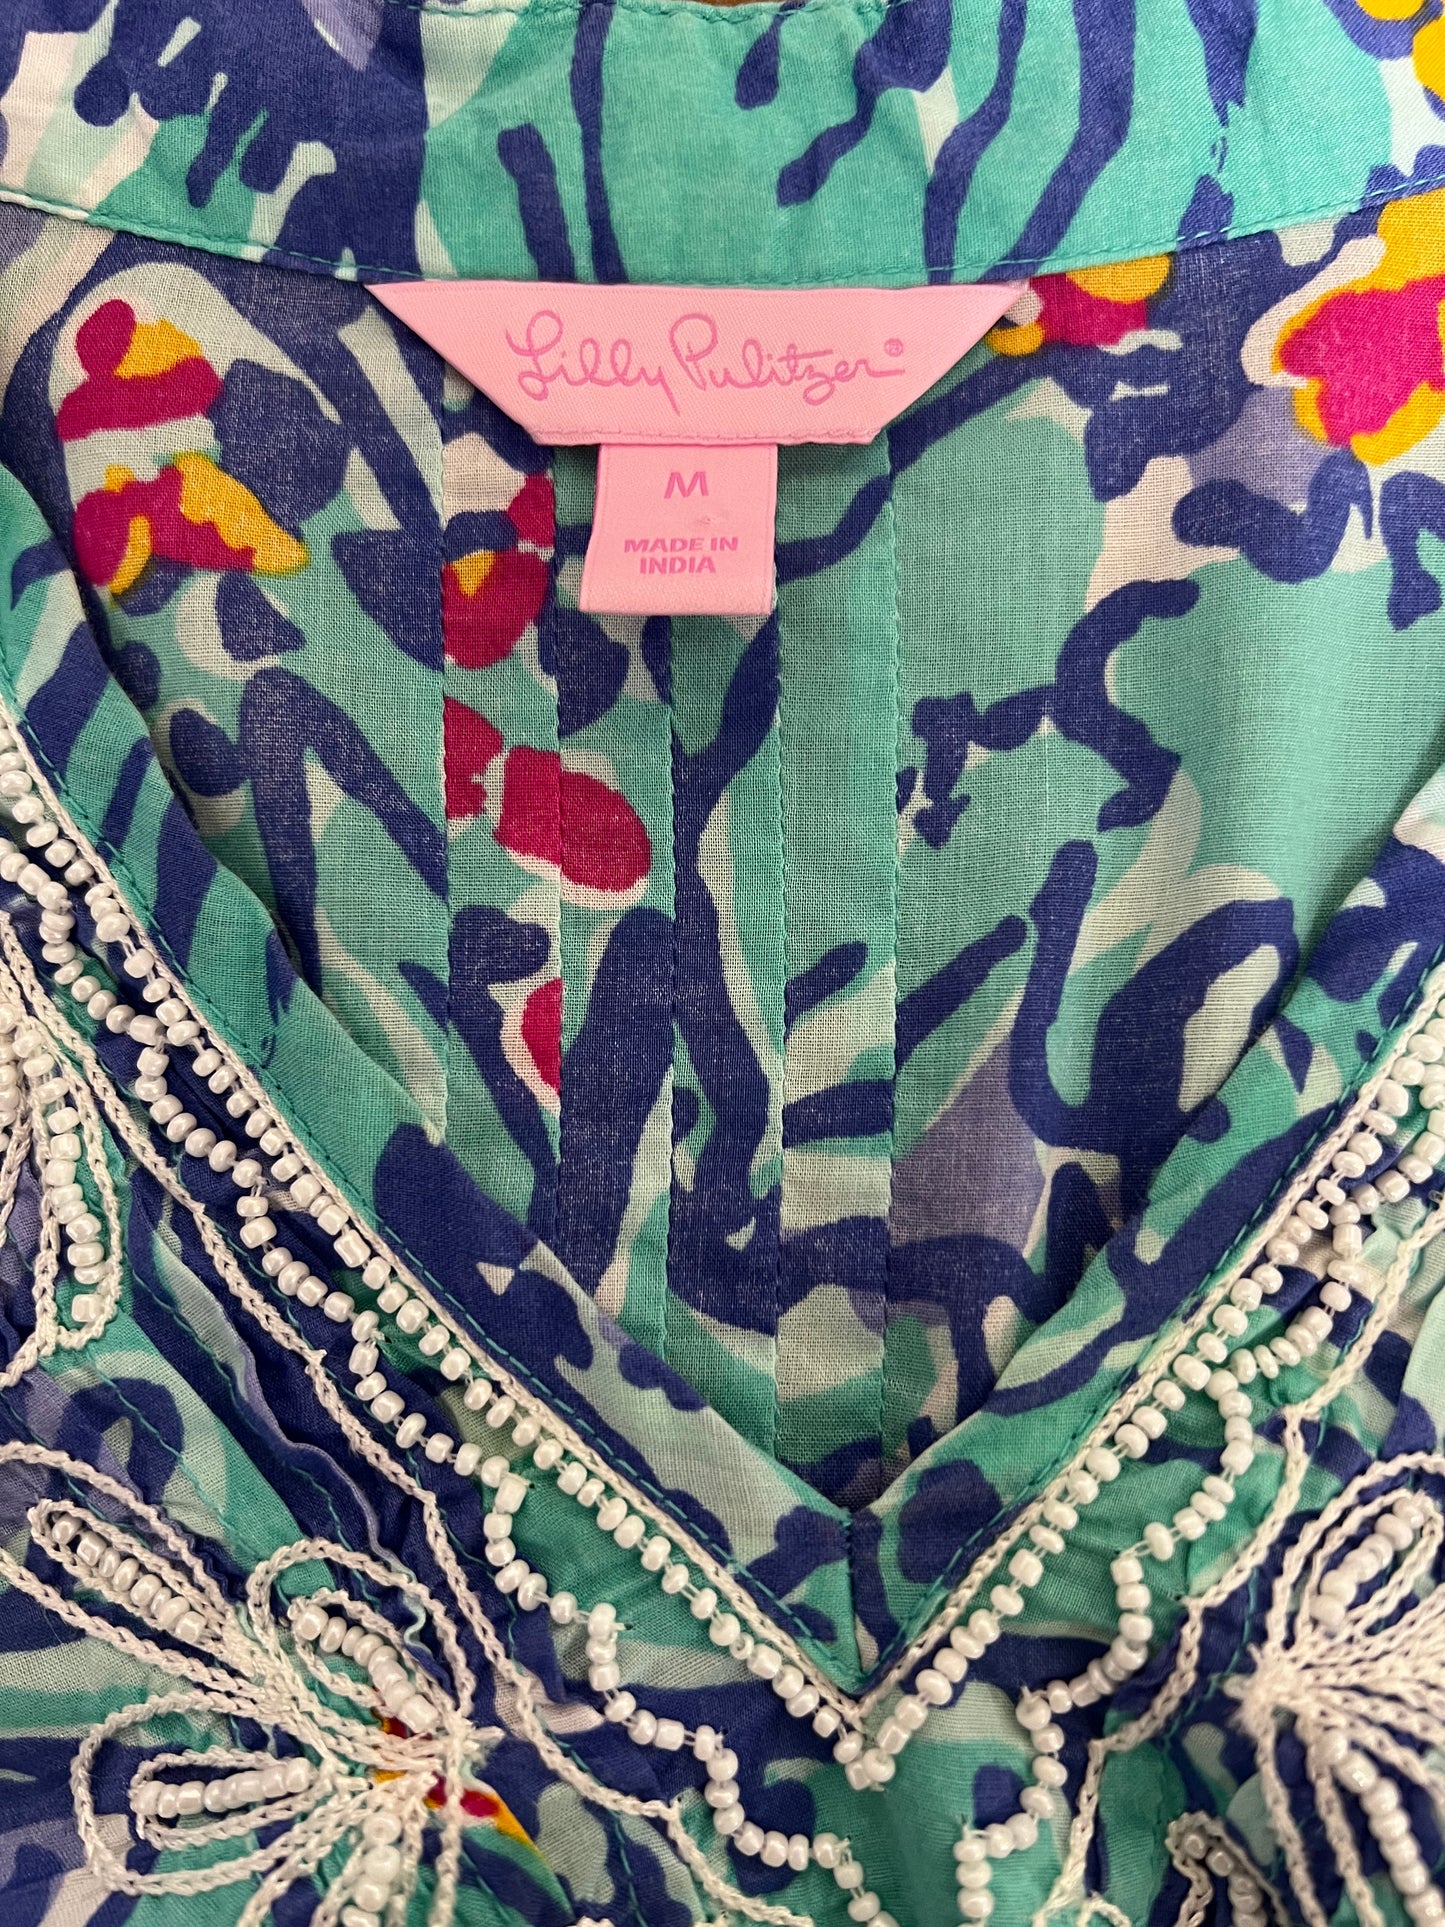 Lilly Pulitzer Women's Tunic Top. Size Medium. Mulit color